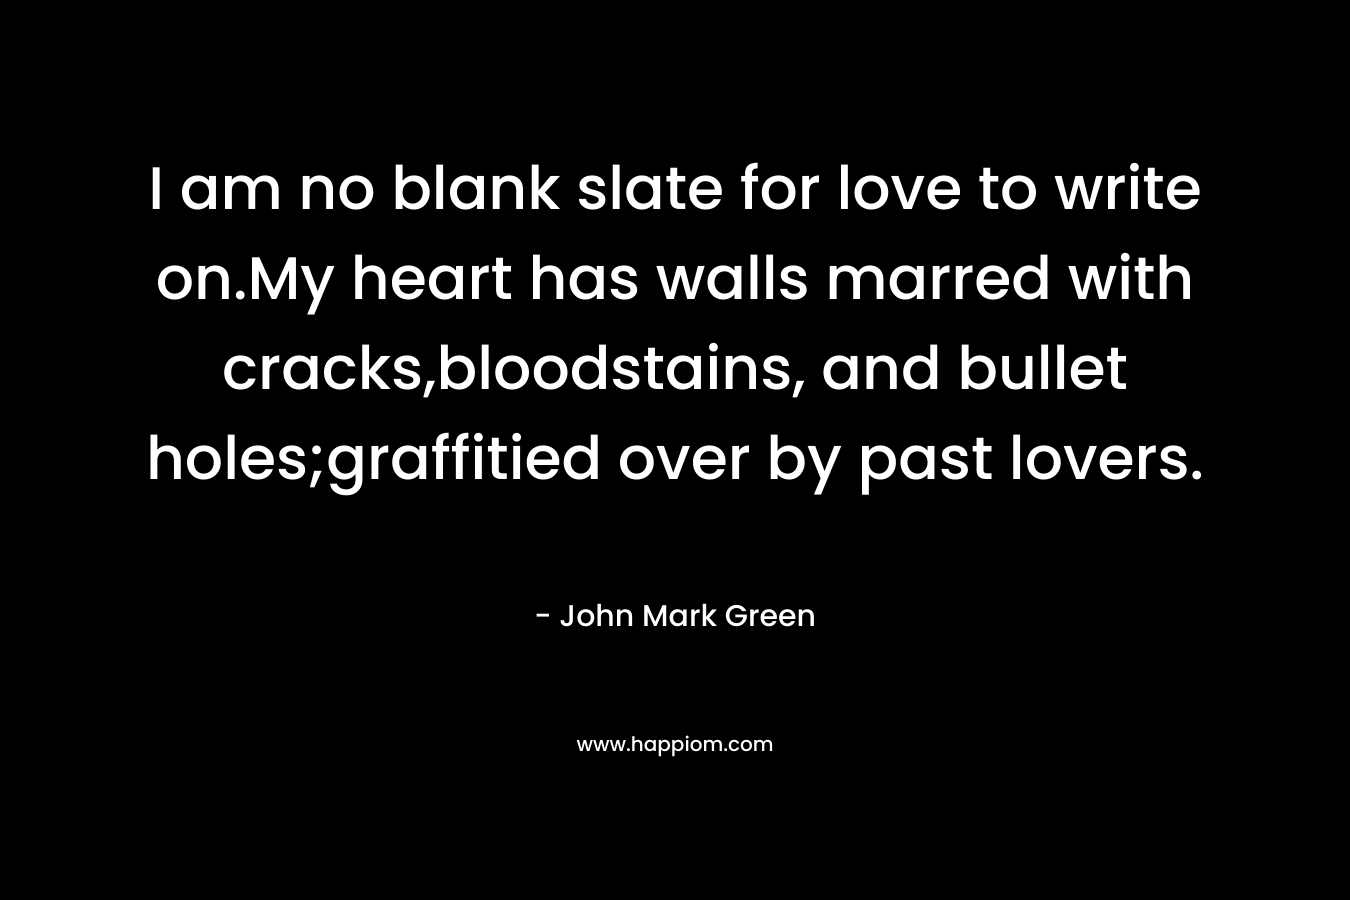 I am no blank slate for love to write on.My heart has walls marred with cracks,bloodstains, and bullet holes;graffitied over by past lovers.